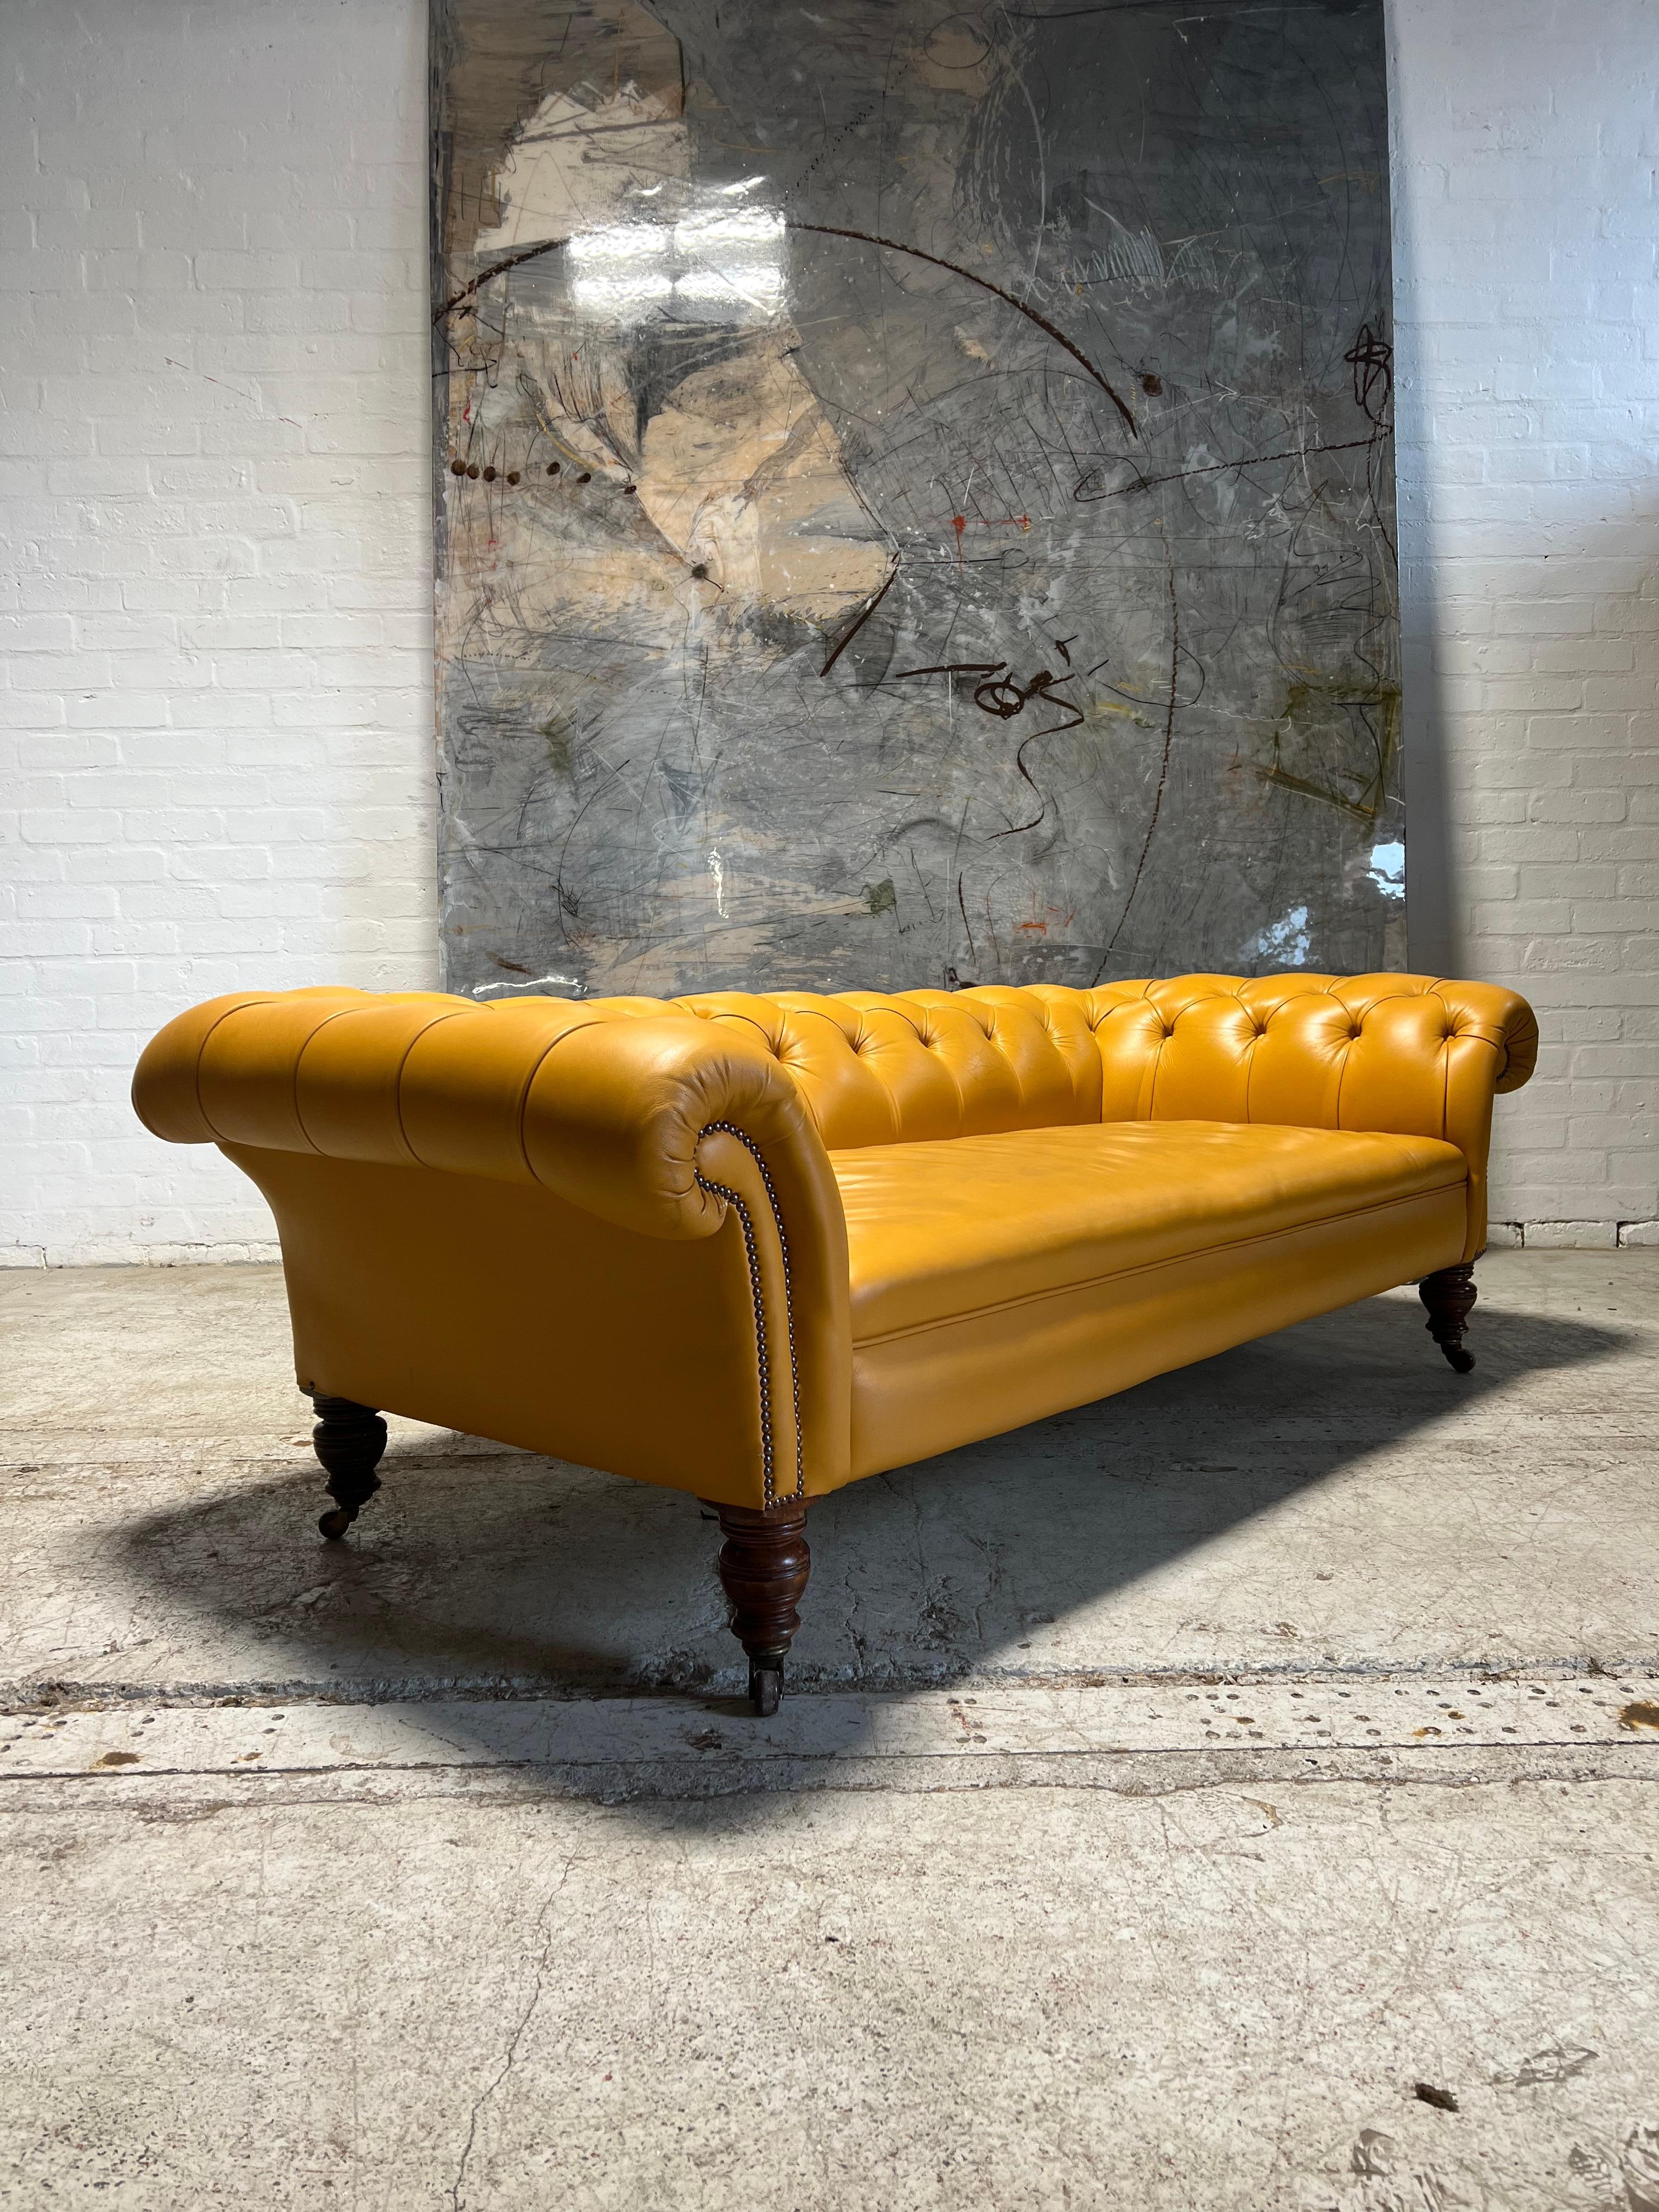 As a Lapada dealer and furniture maker, I always have a very good selection of pieces in stock with a wide range of price points.

A very elegant 19thC Chesterfield sofa in a particularly distinctive soft mustard yellow leather.

An incredible seat